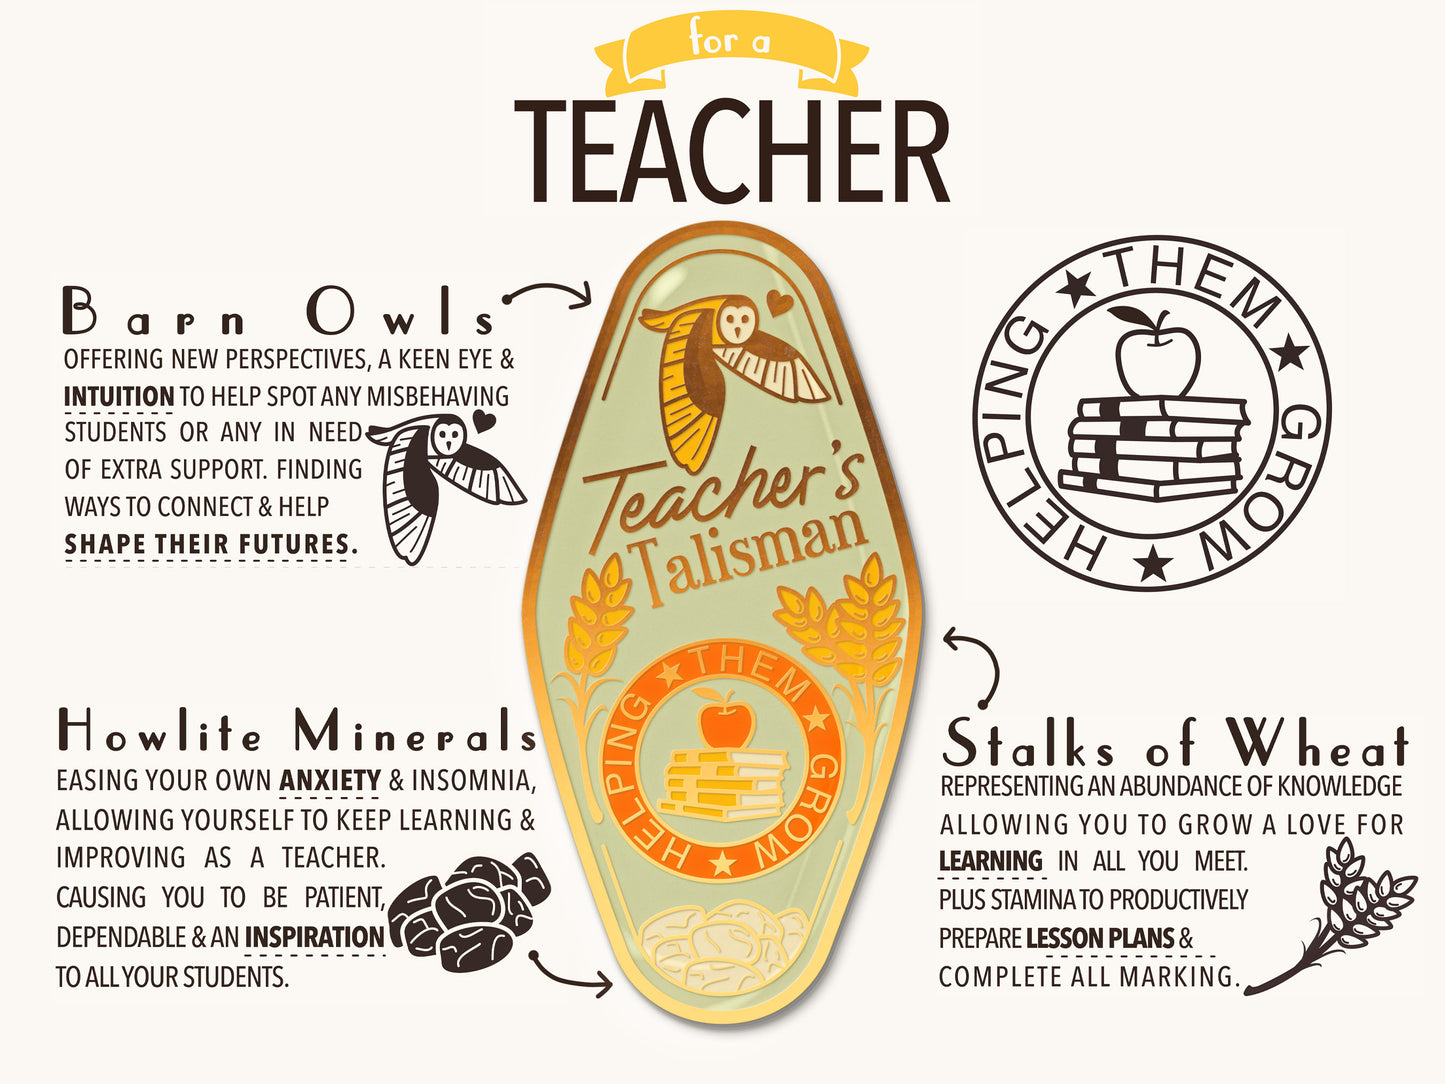 A illustrated diagram outline the symbolism of the different design elements of the for a Teacher's Talisman pin. Information includes the meaning of the Barn owls, howlite minerals and stalks of wheat